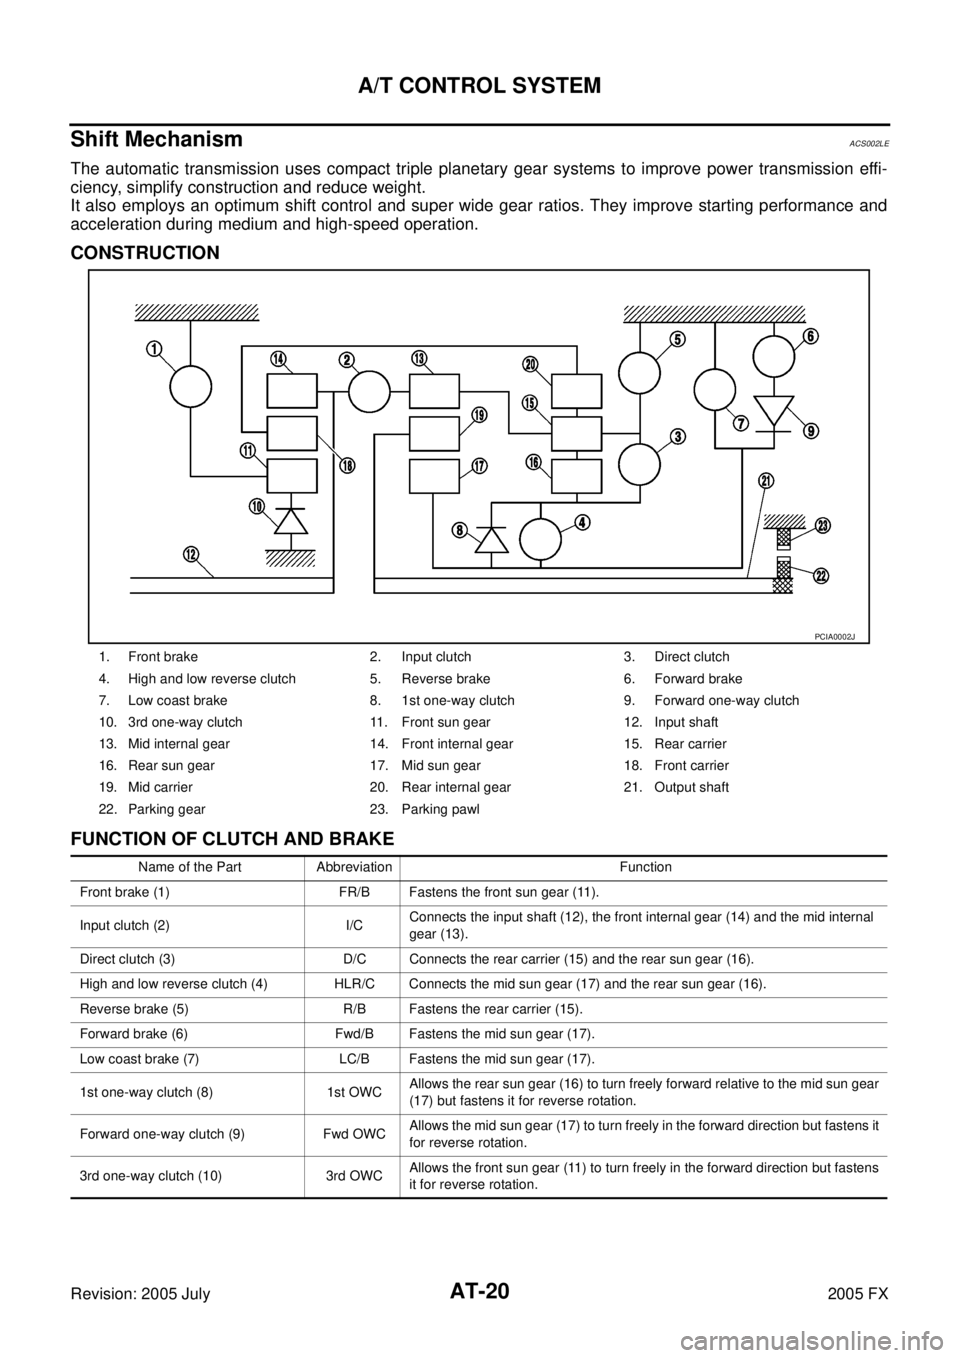 INFINITI FX35 2005  Service Manual AT-20
A/T CONTROL SYSTEM
Revision: 2005 July 2005 FX
Shift MechanismACS002LE
The automatic transmission uses compact triple planetary gear systems to improve power transmission effi- 
ciency, simplify